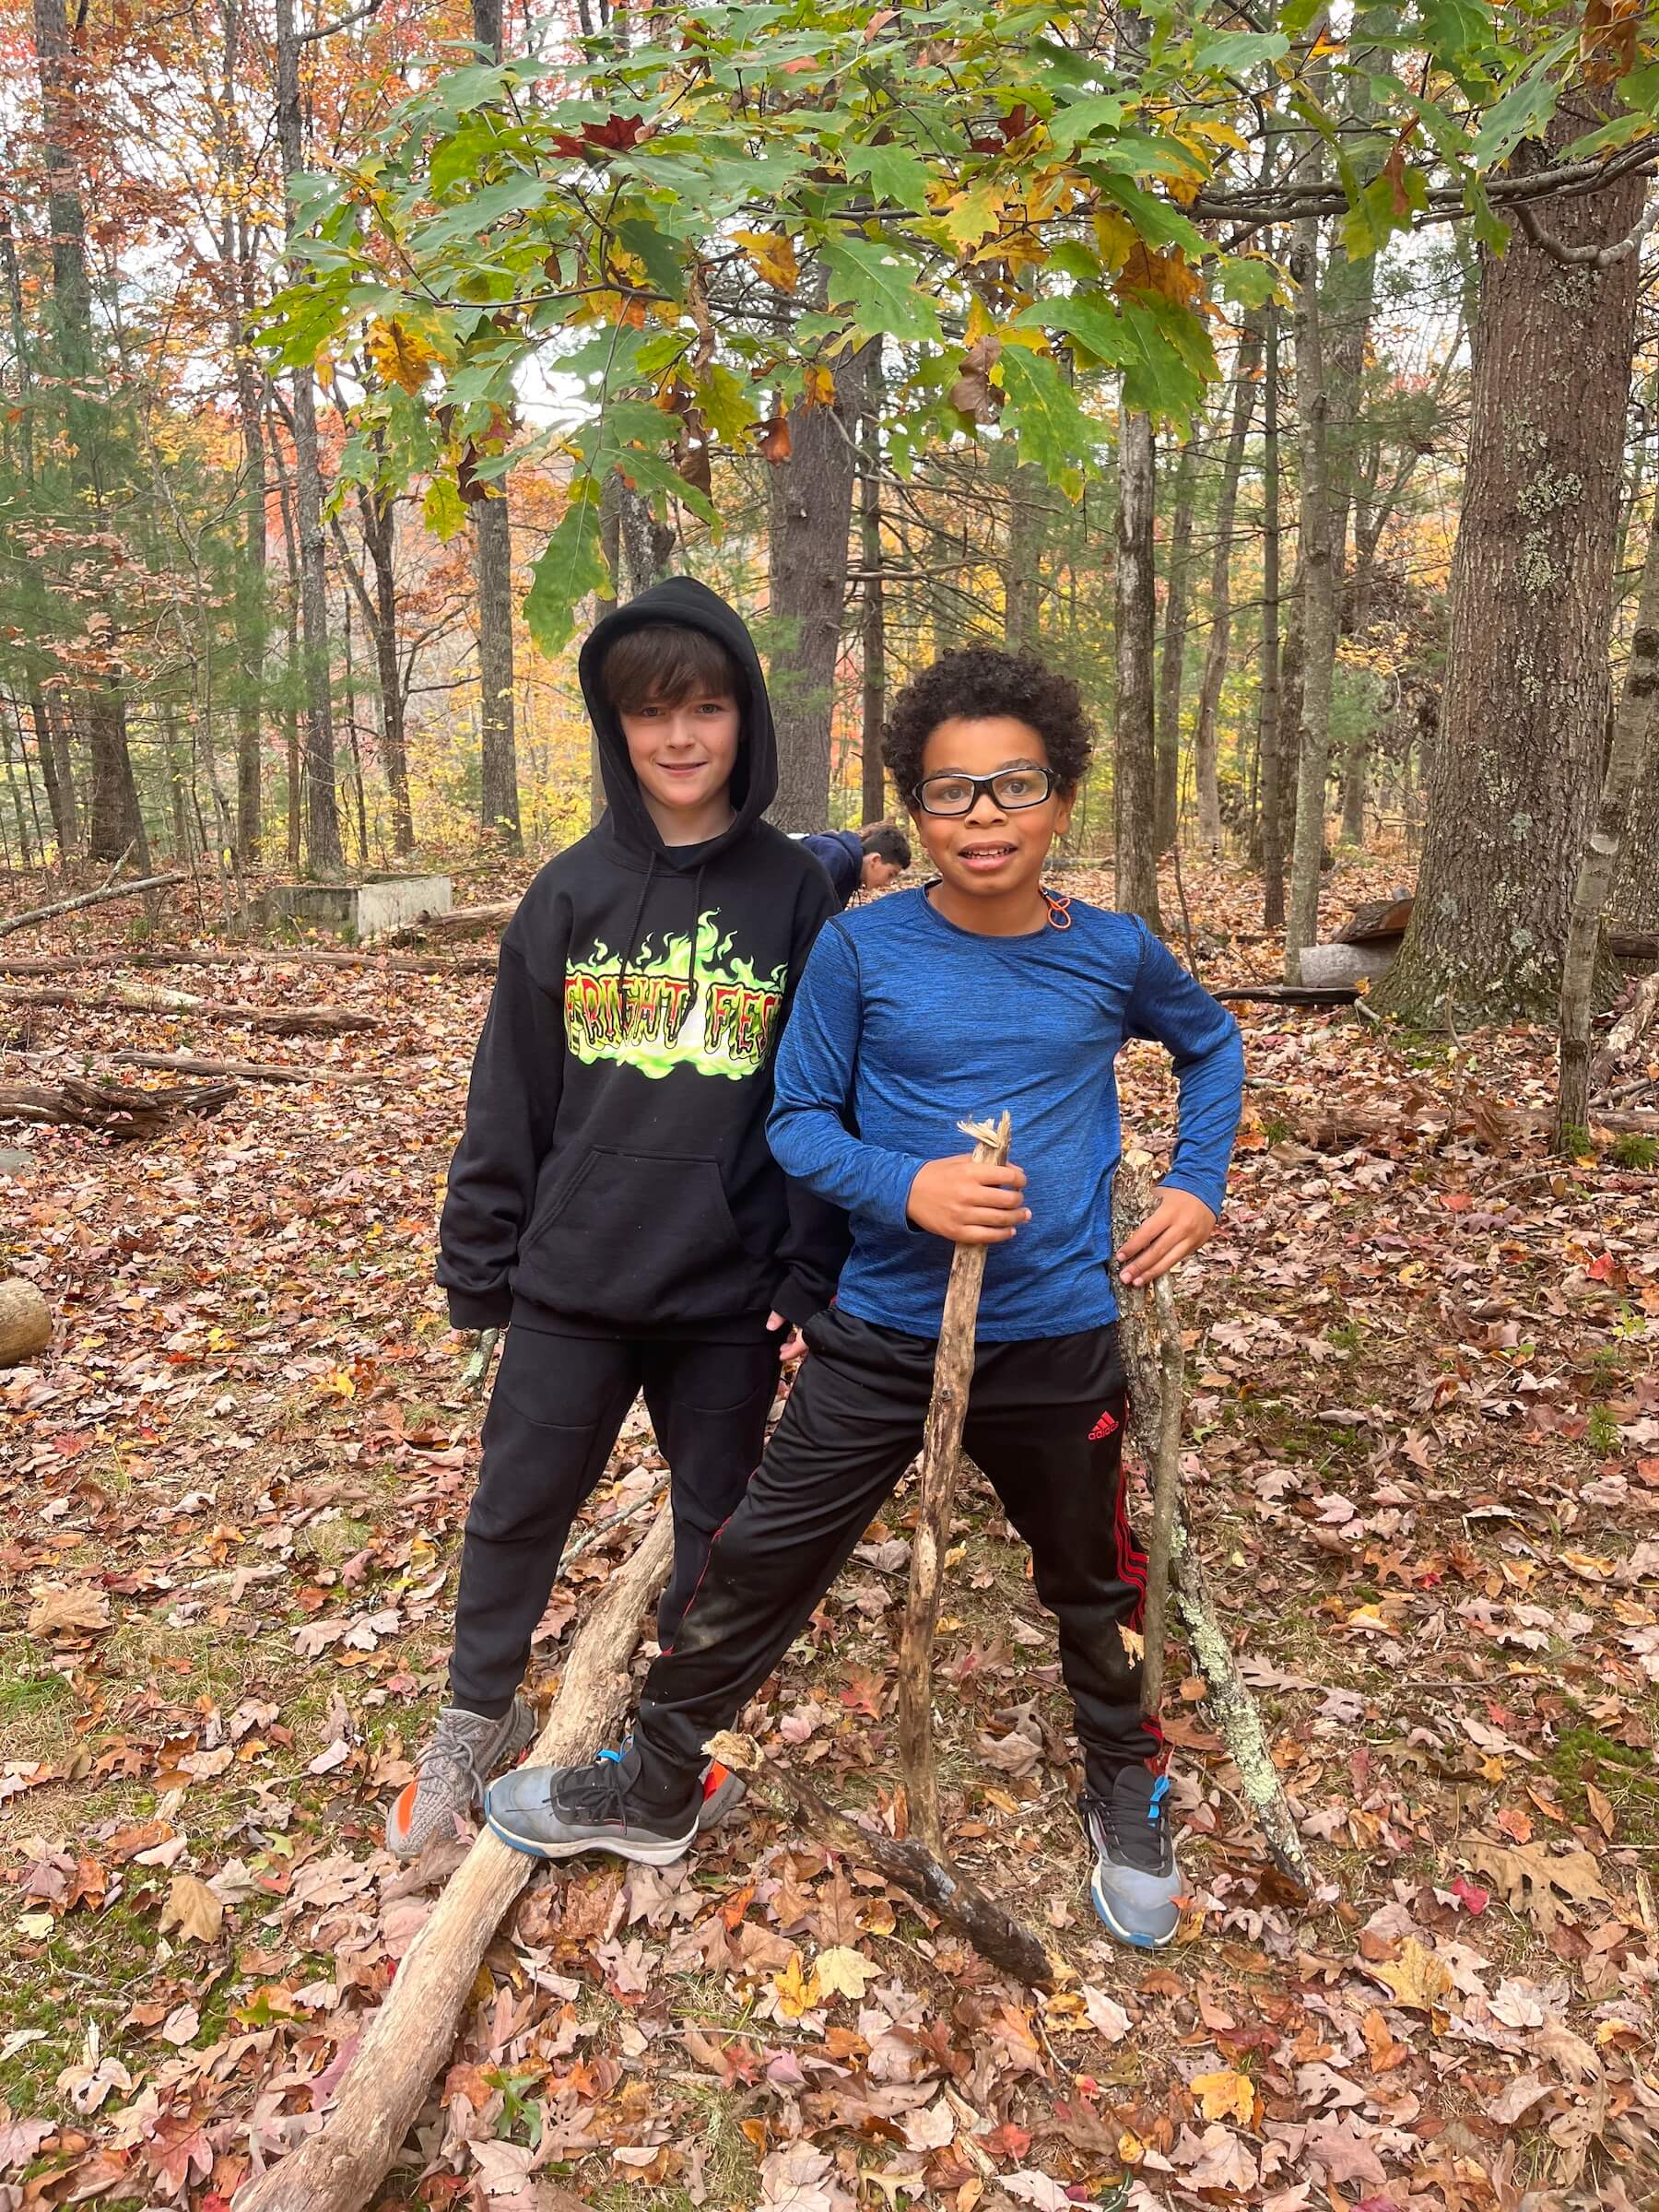 Ethical Culture Fieldston School_Feel Good Photos_Fieldston Lower students stand in woods during a field trip